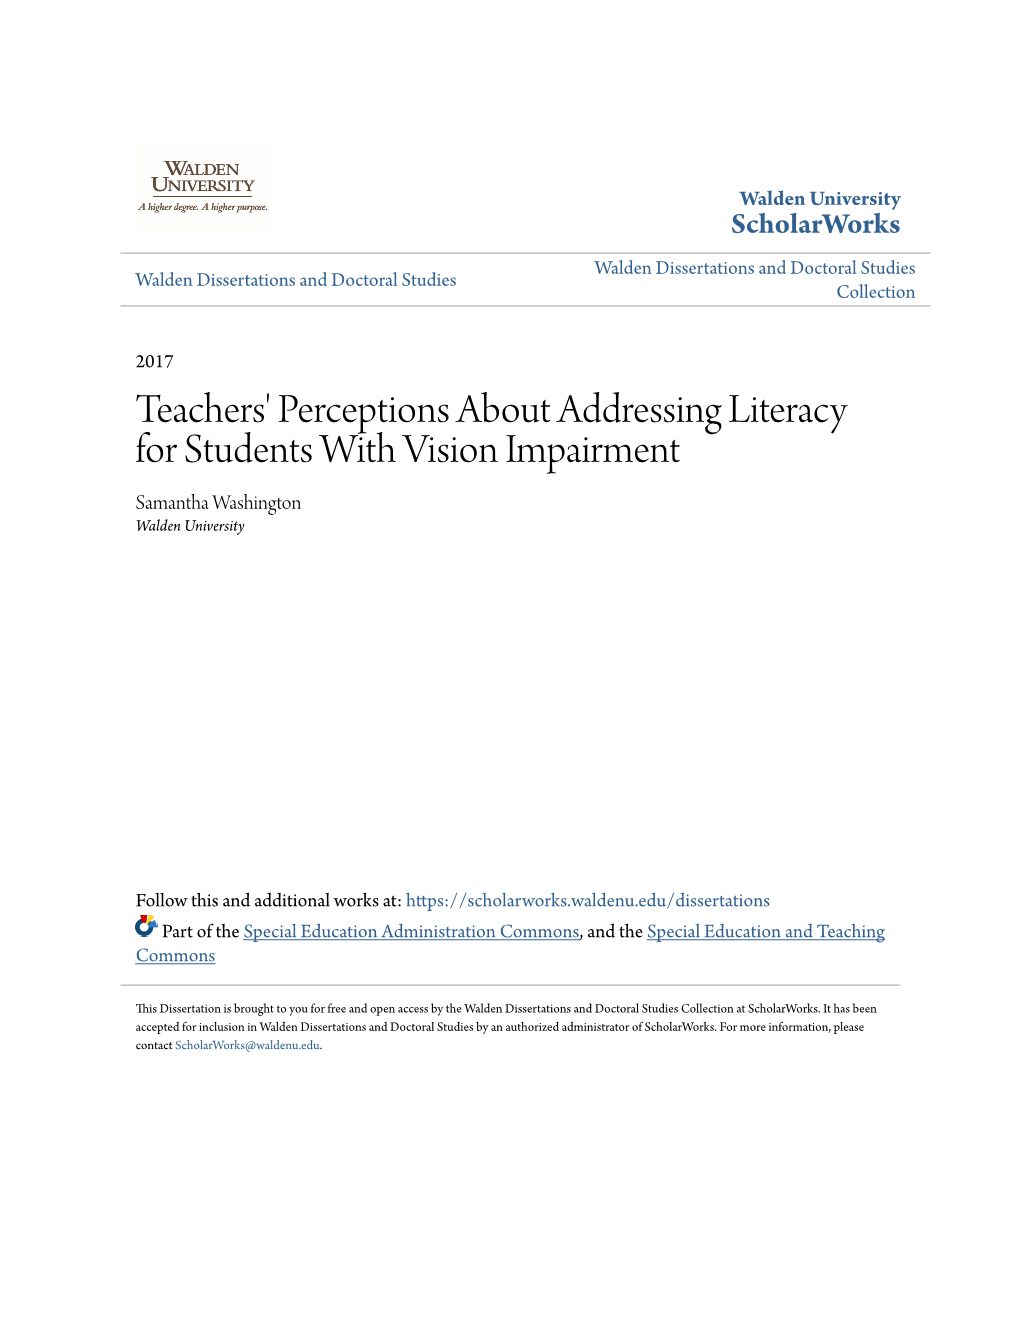 Teachers' Perceptions About Addressing Literacy for Students with Vision Impairment Samantha Washington Walden University